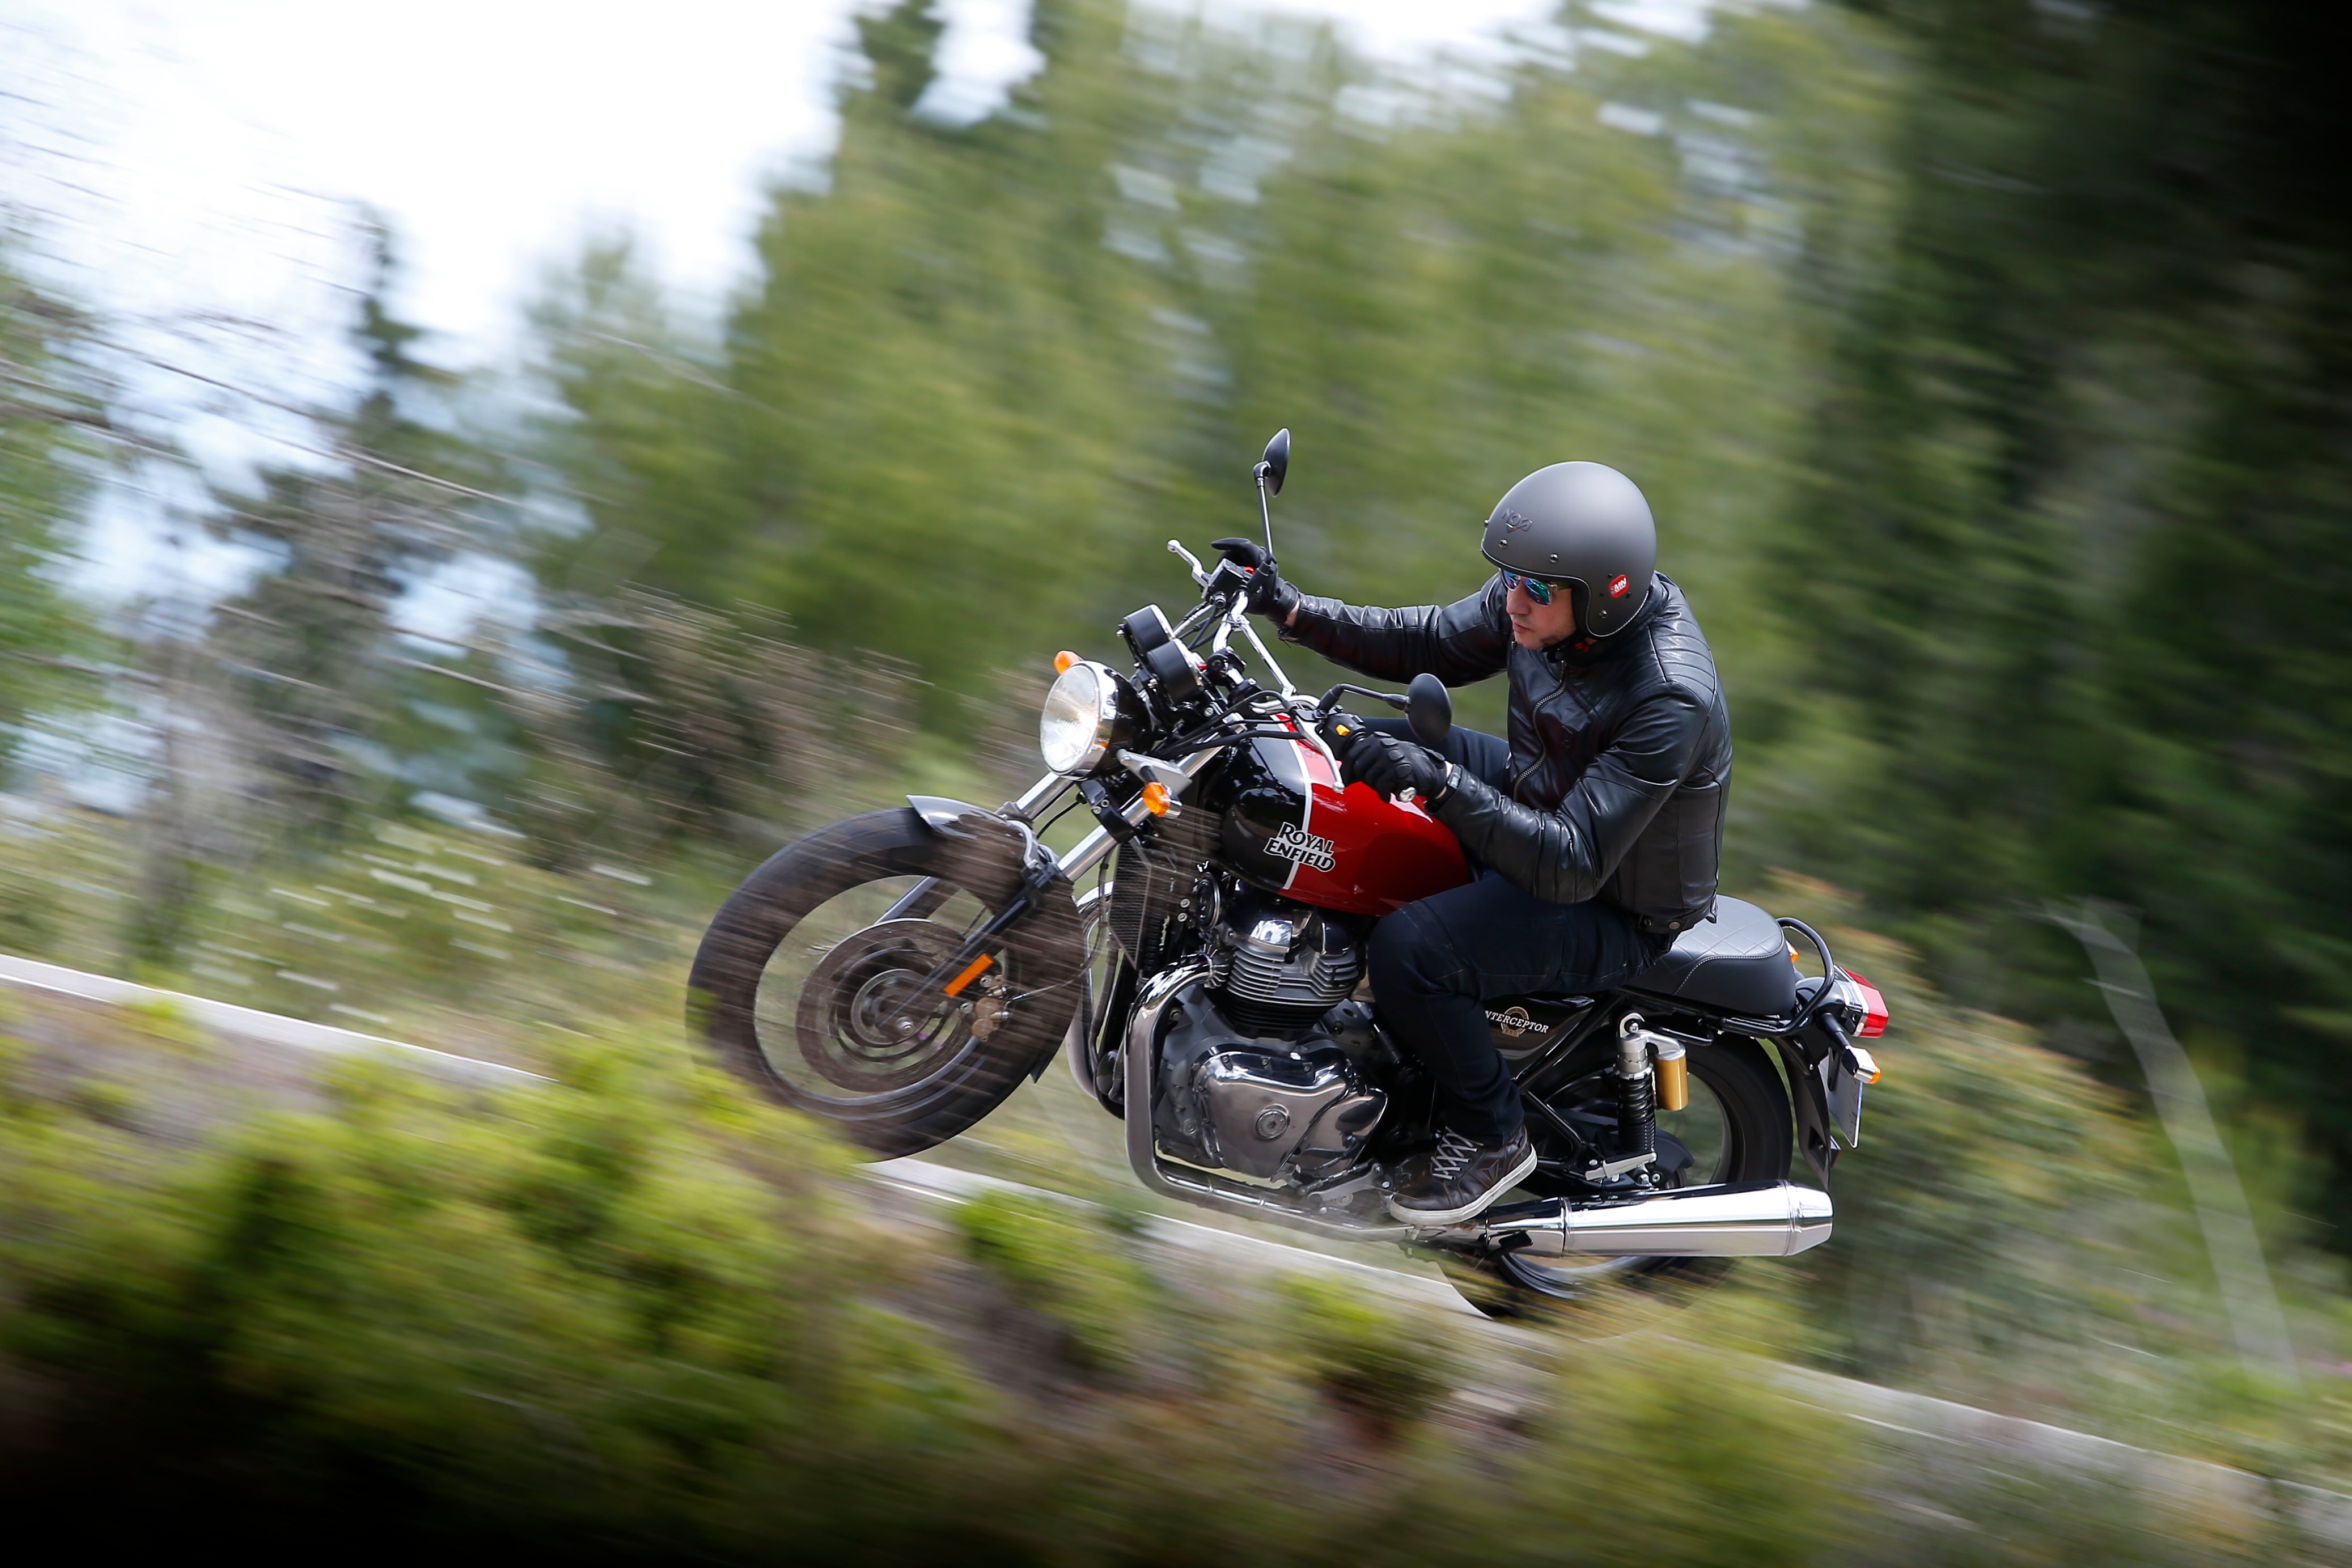 Why is your motorcycle safety gear important?